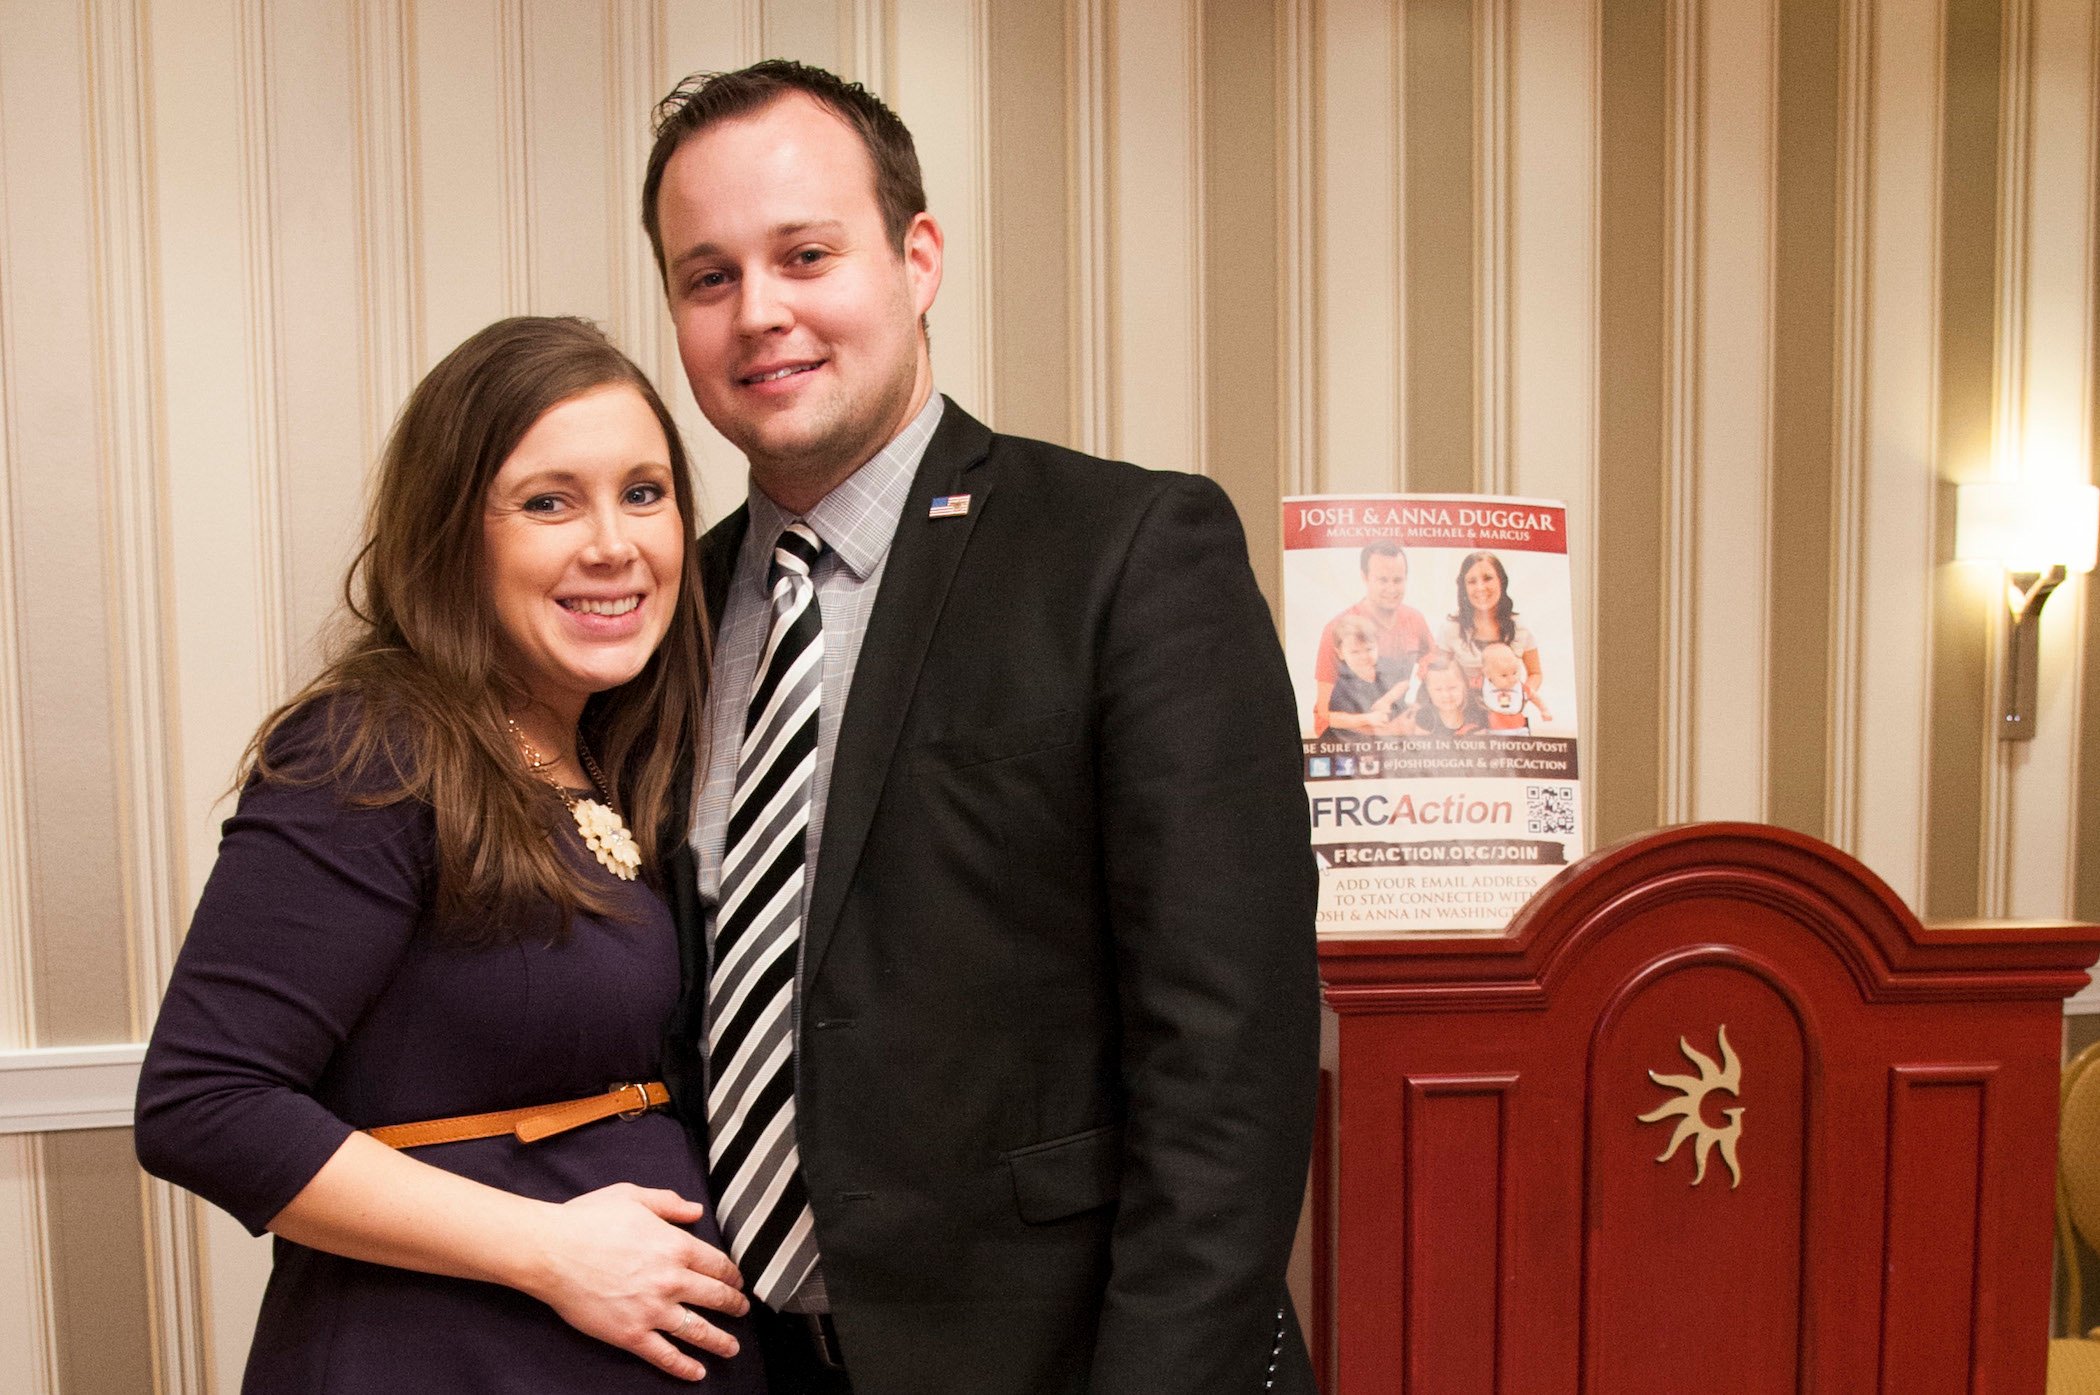 Anna Duggar and Josh Duggar from the Duggar family posing together at the Conservative Political Action Conference